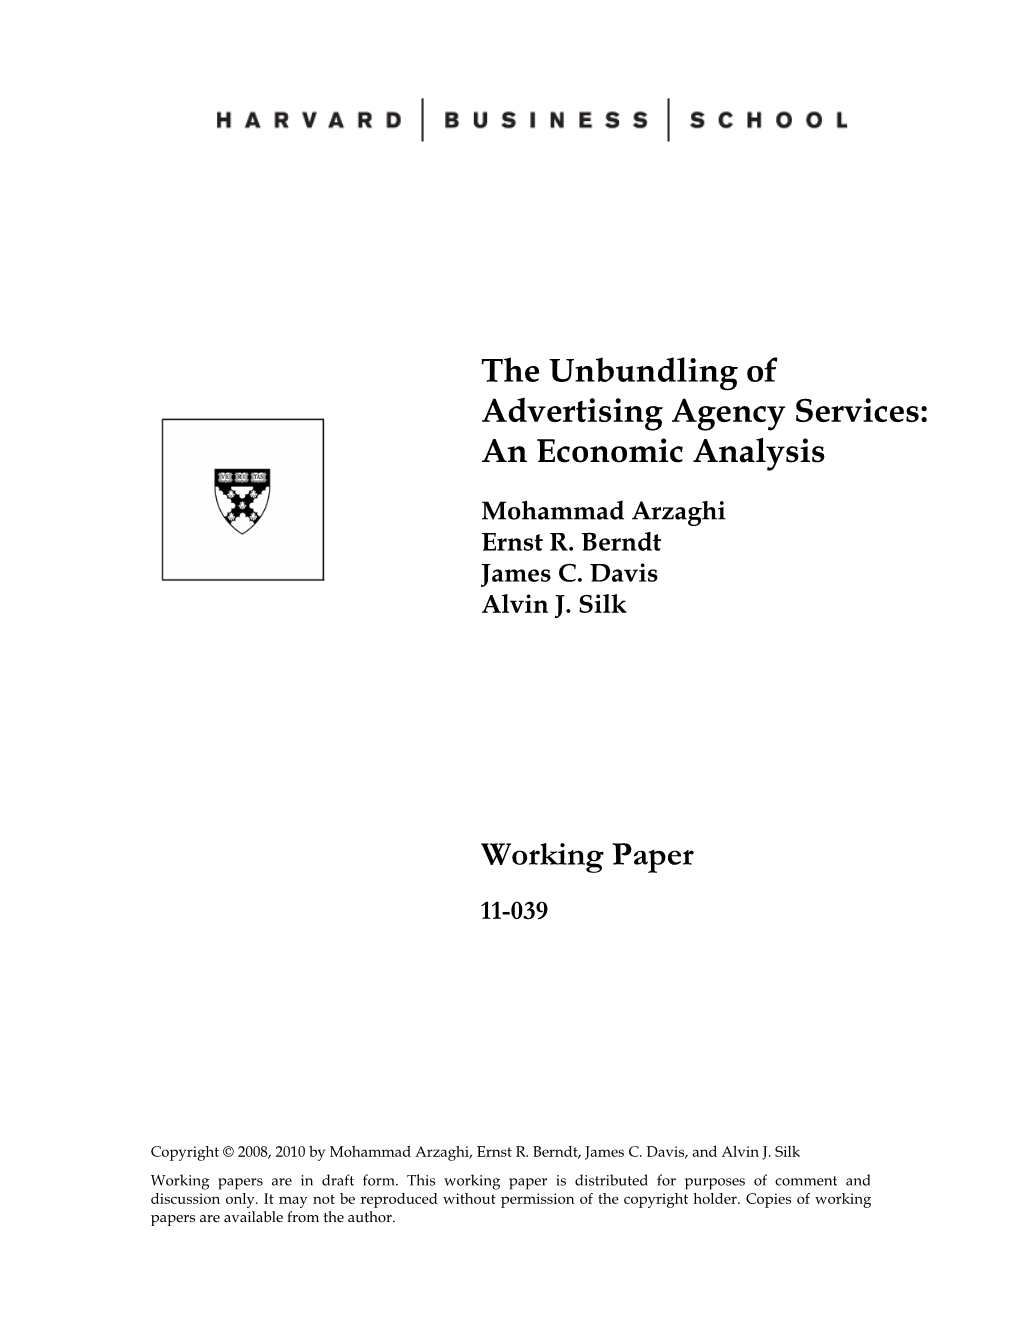 The Unbundling of Advertising Agency Services: an Economic Analysis